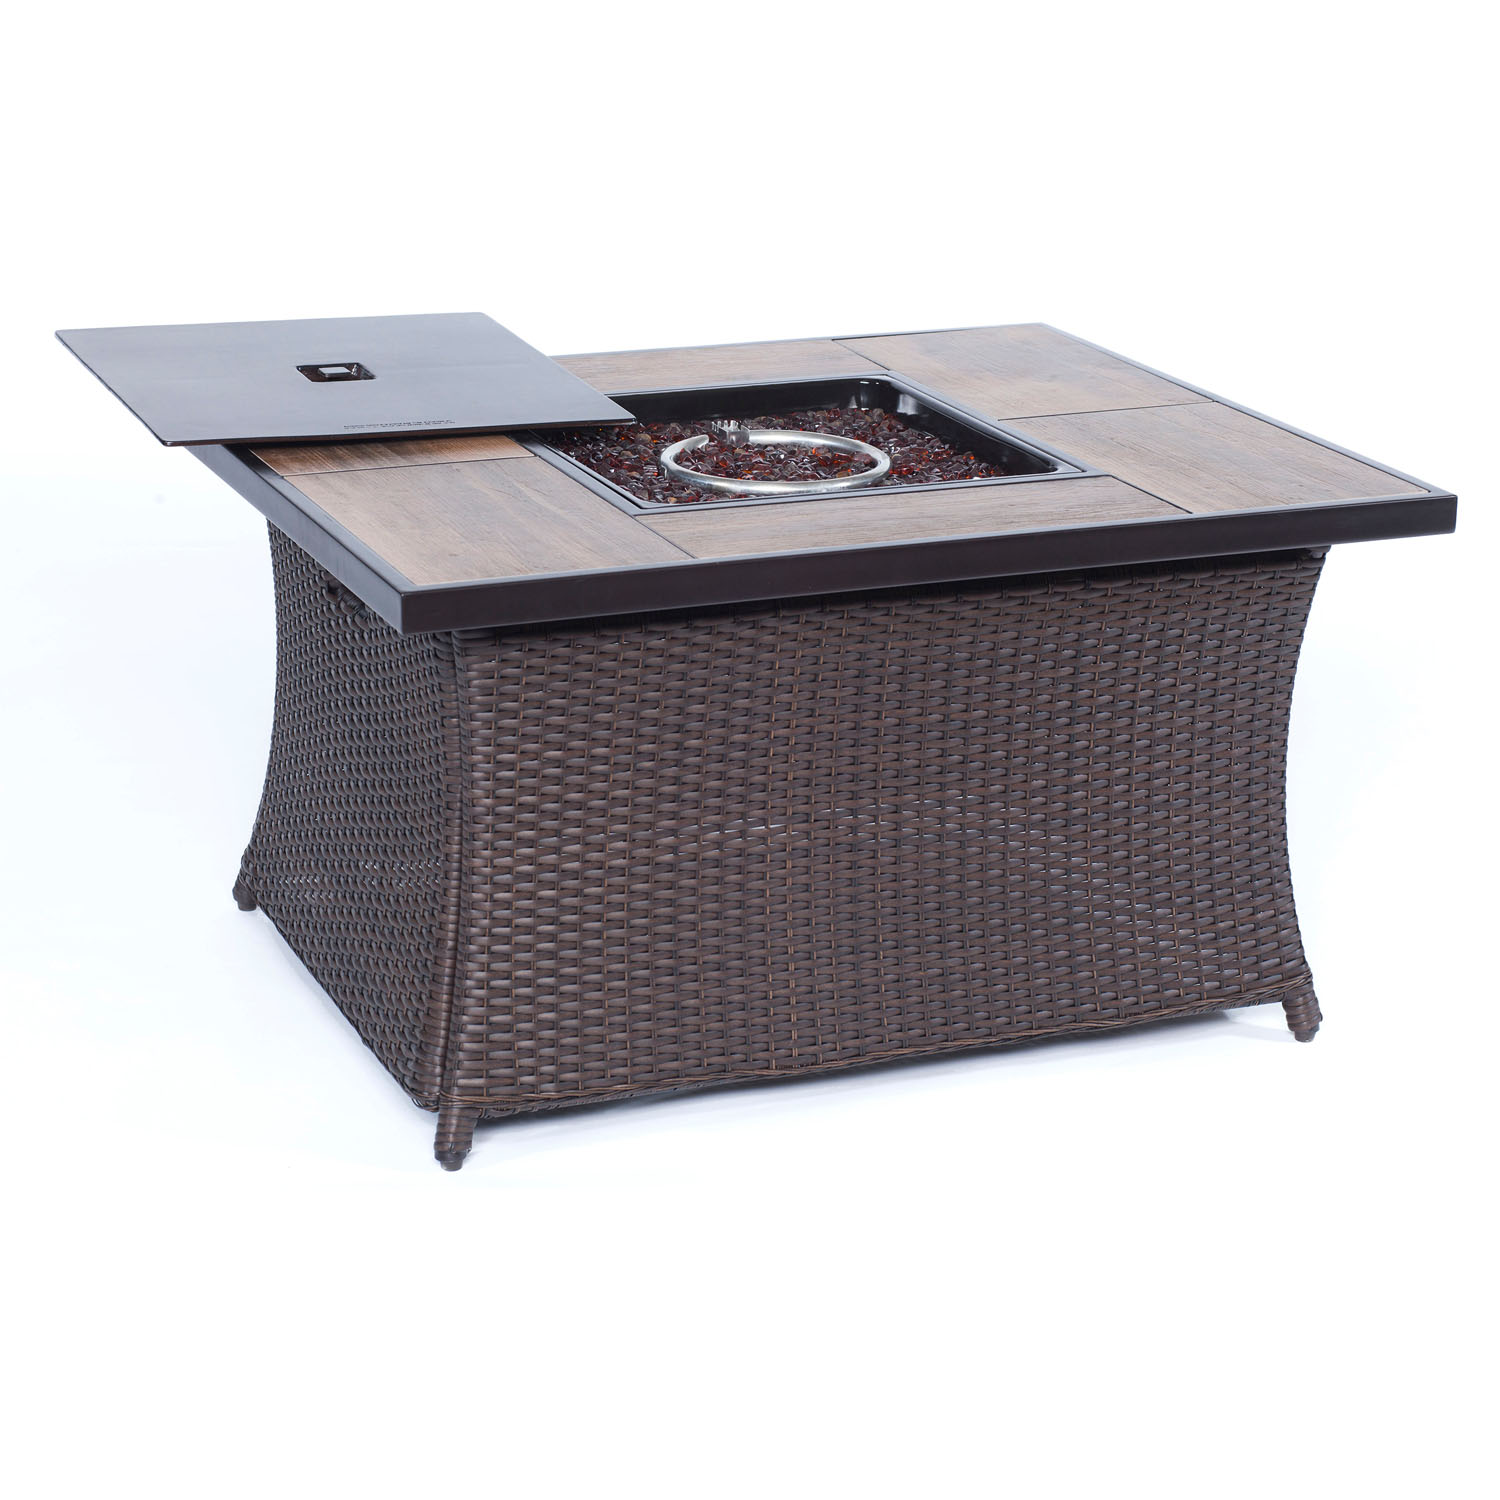 Hanover Metropolitan 3-Piece Woven Fire Pit Lounge Set with Glazed Faux-Wood Tile Top - image 4 of 7